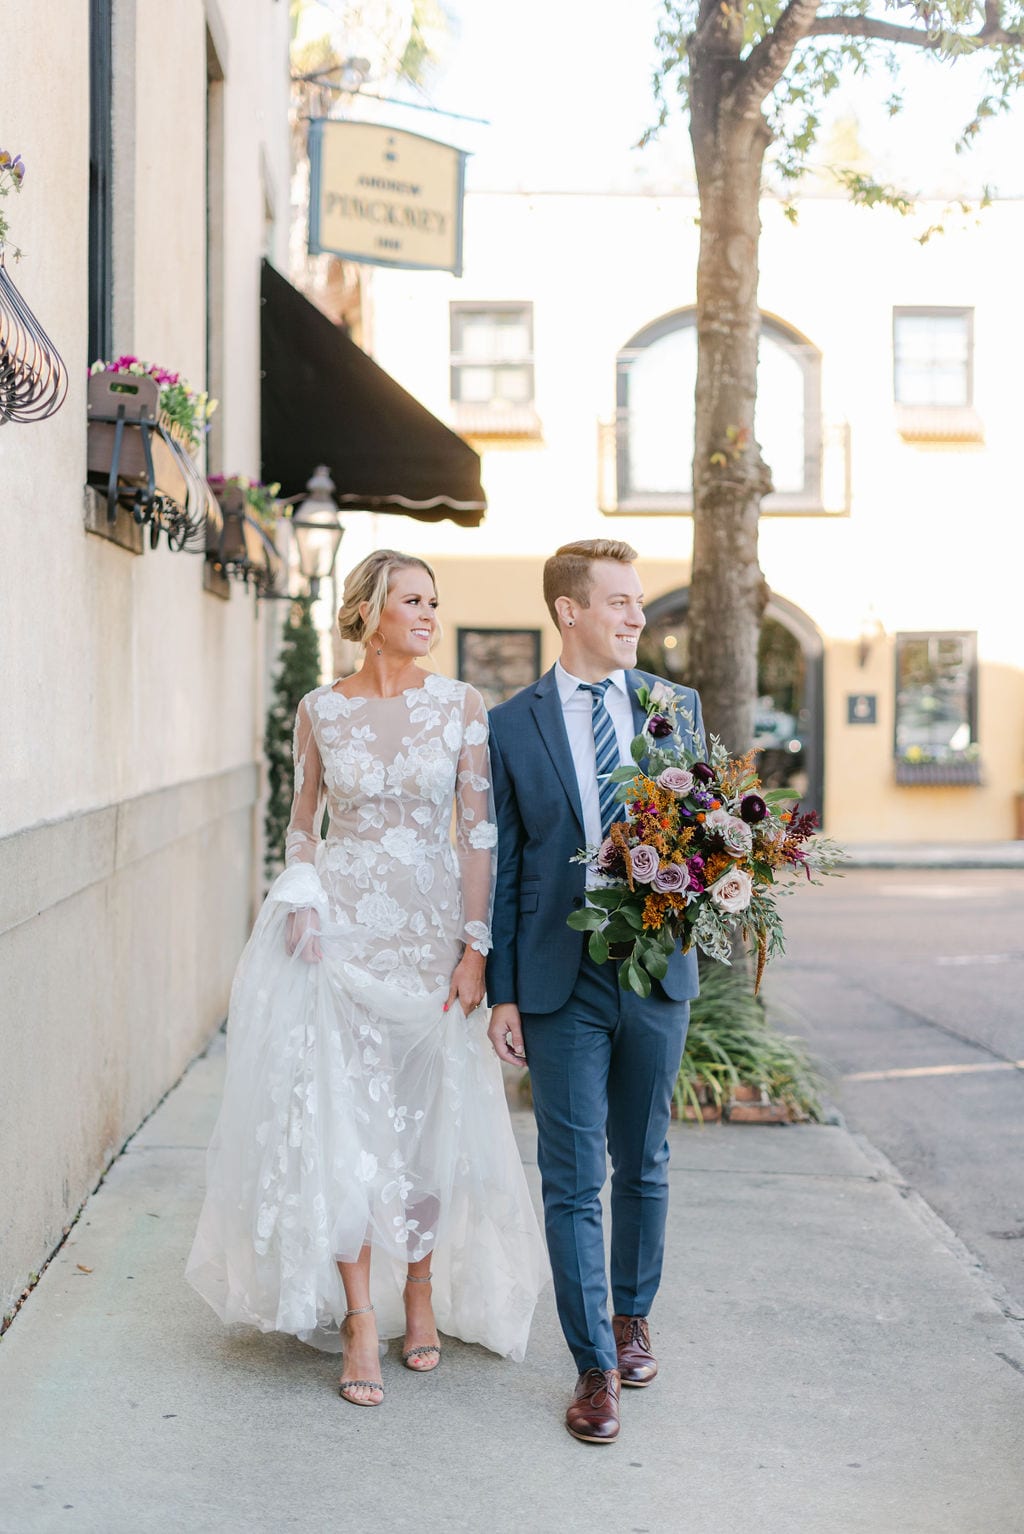 Bride and groom walking around downtown Charleston after their Charleston elopement. Bride is wearing a netted dress with floral accents, carrying and colorful bouquet.